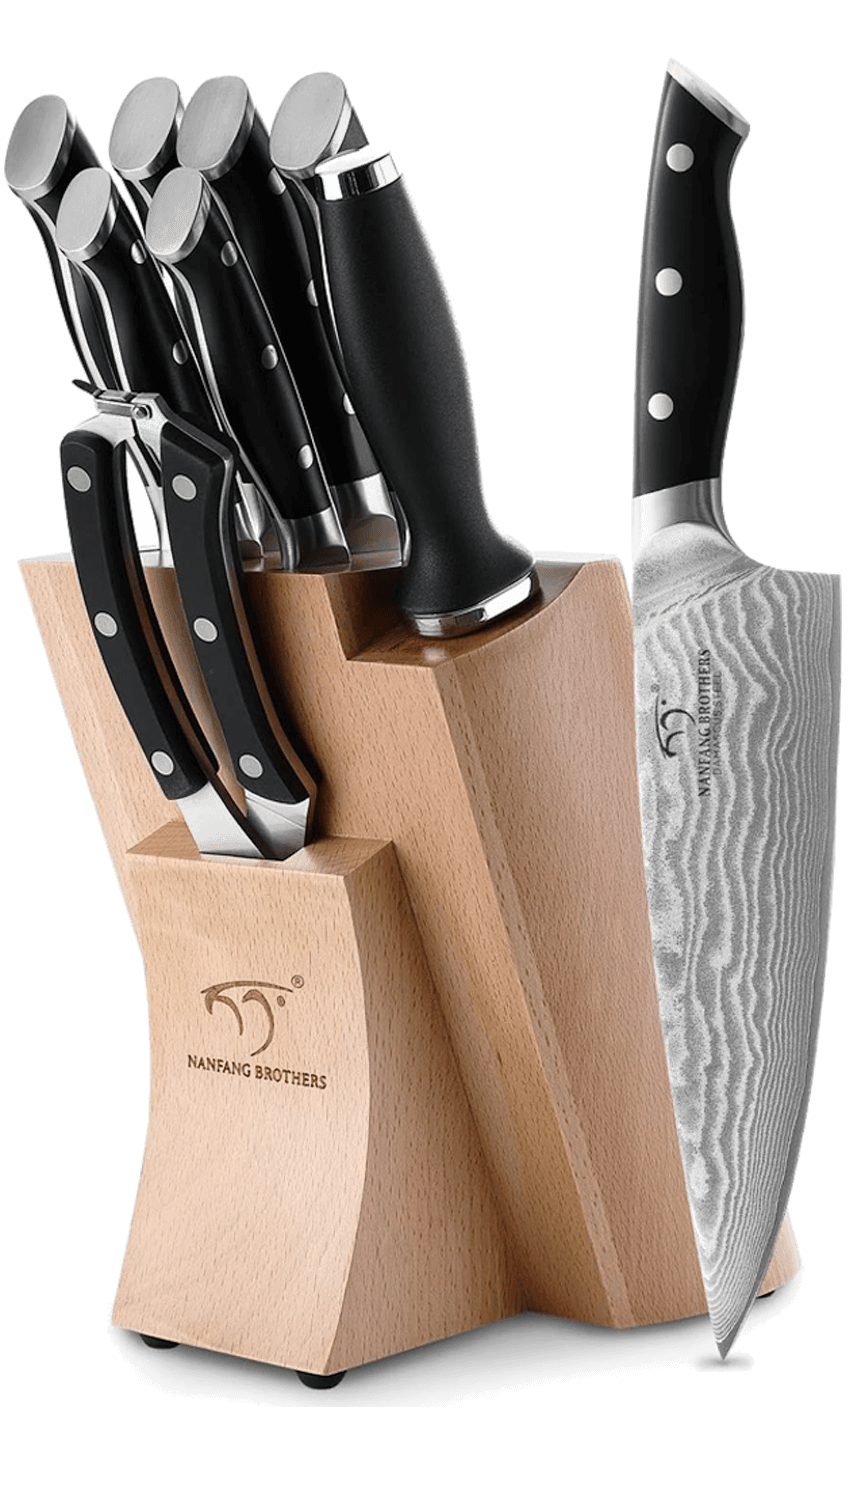 NANFANG BROTHERS Knife Set-9 Pieces Damascus Kitchen Knife Set with Block